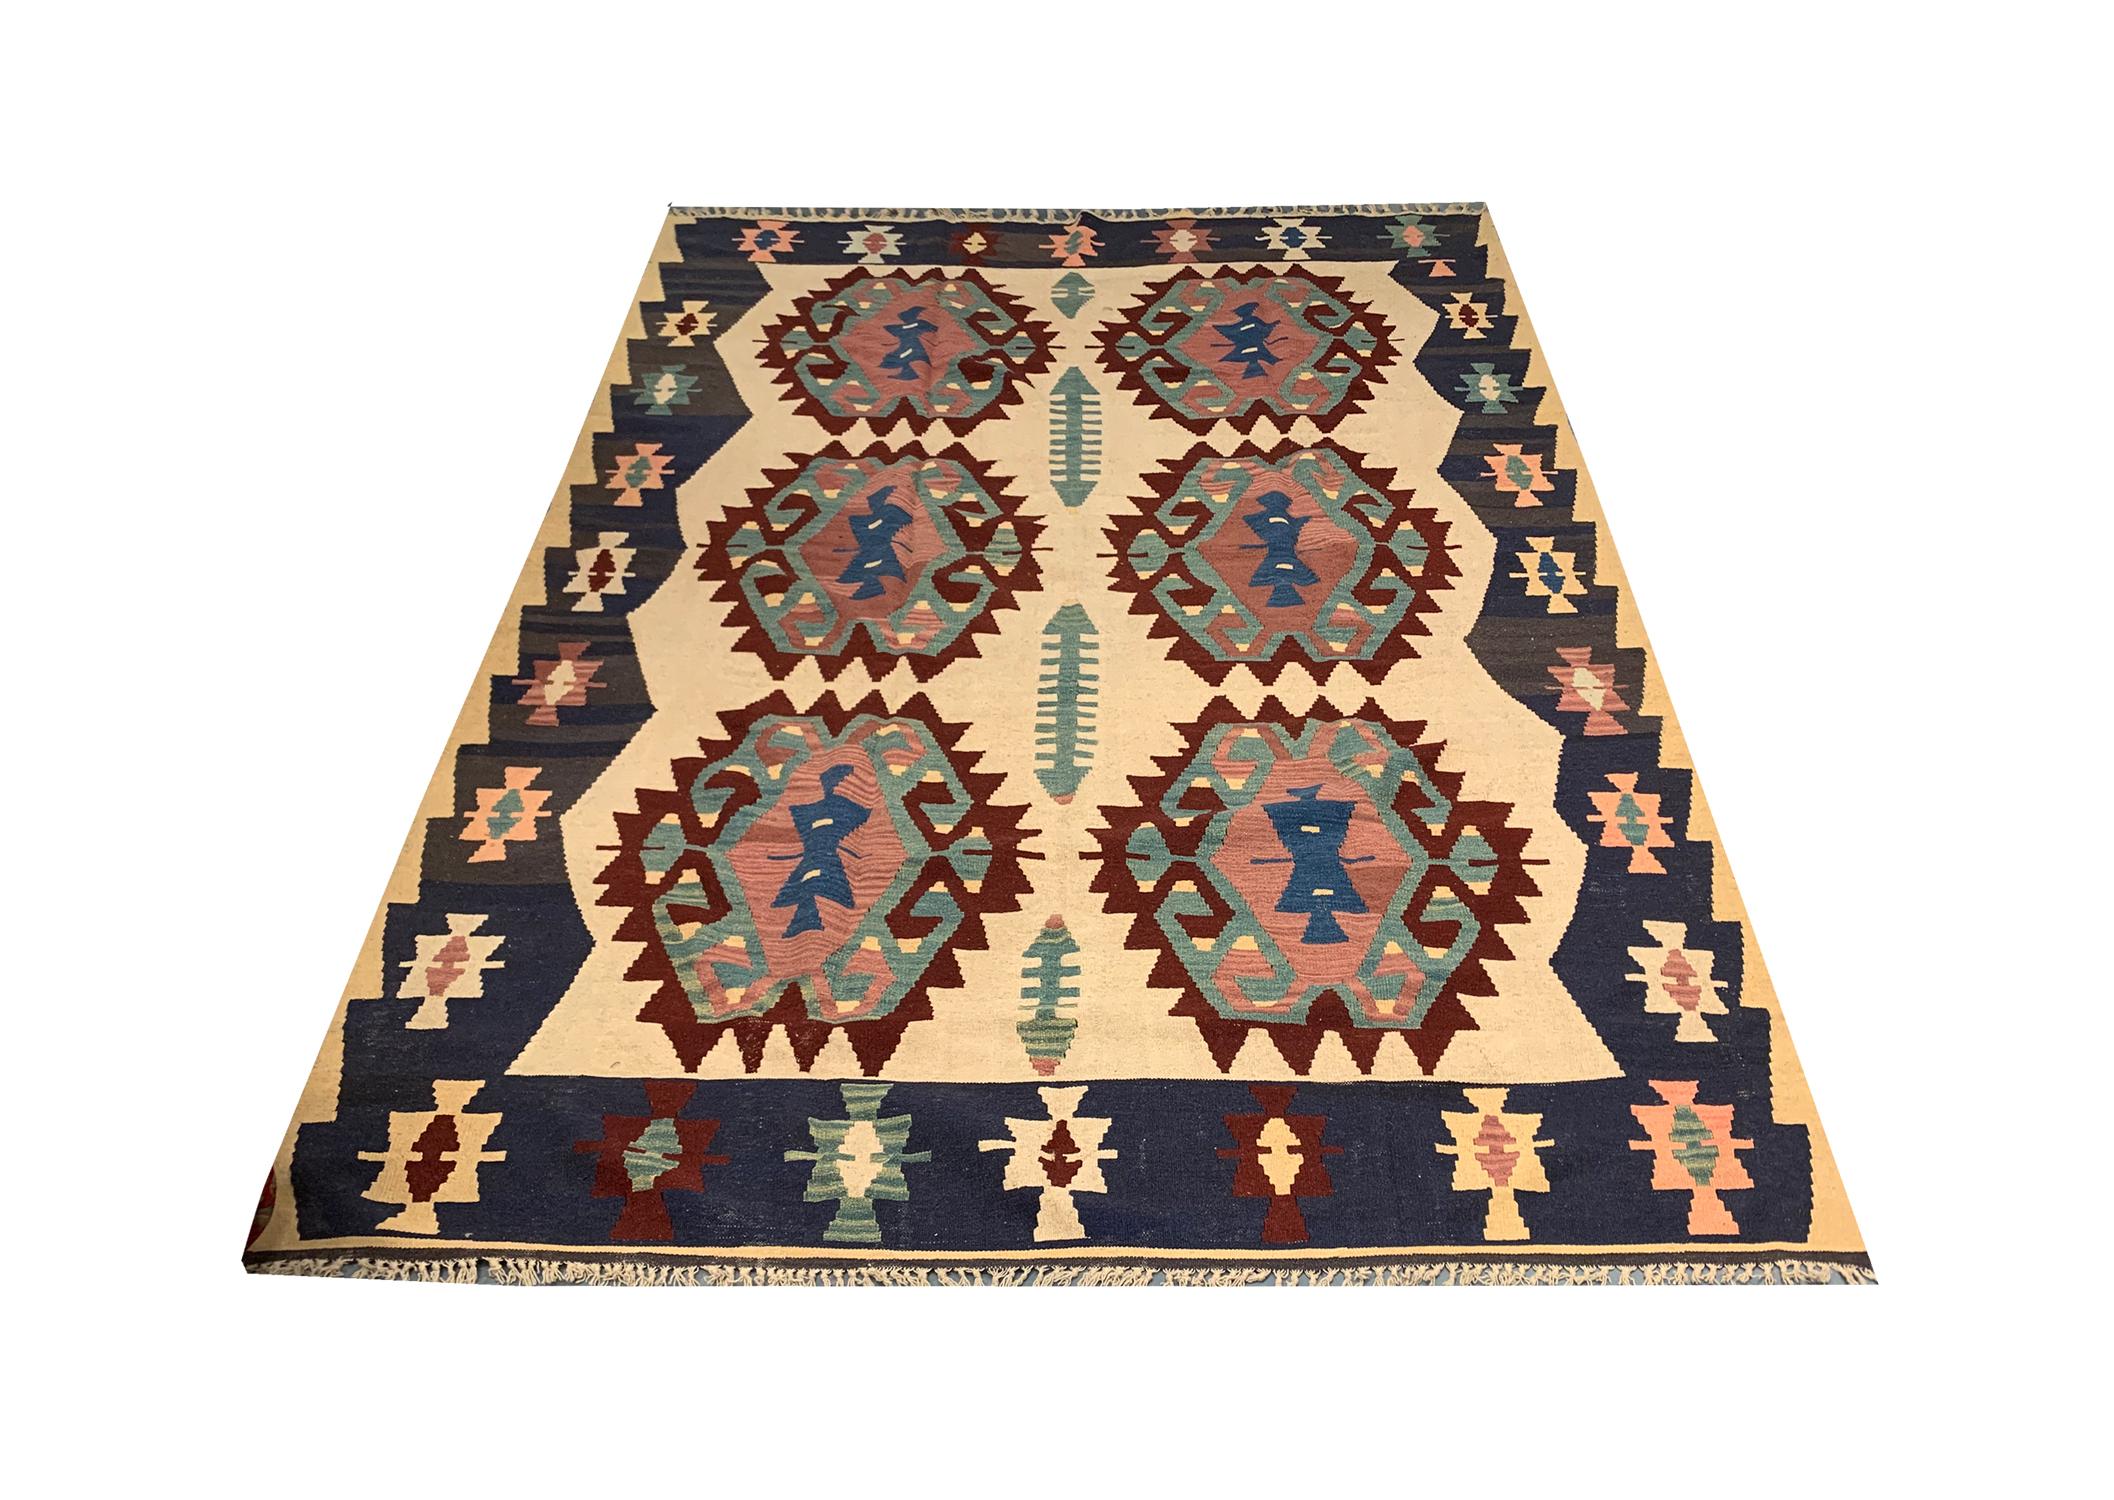 This elegant handwoven wool Kilim area rug was constructed in the late 20th century around 1980 in Turkey. The design features cream, brown, and blue colours that make up the fantastic elegant design. Both the colour and design in this piece are